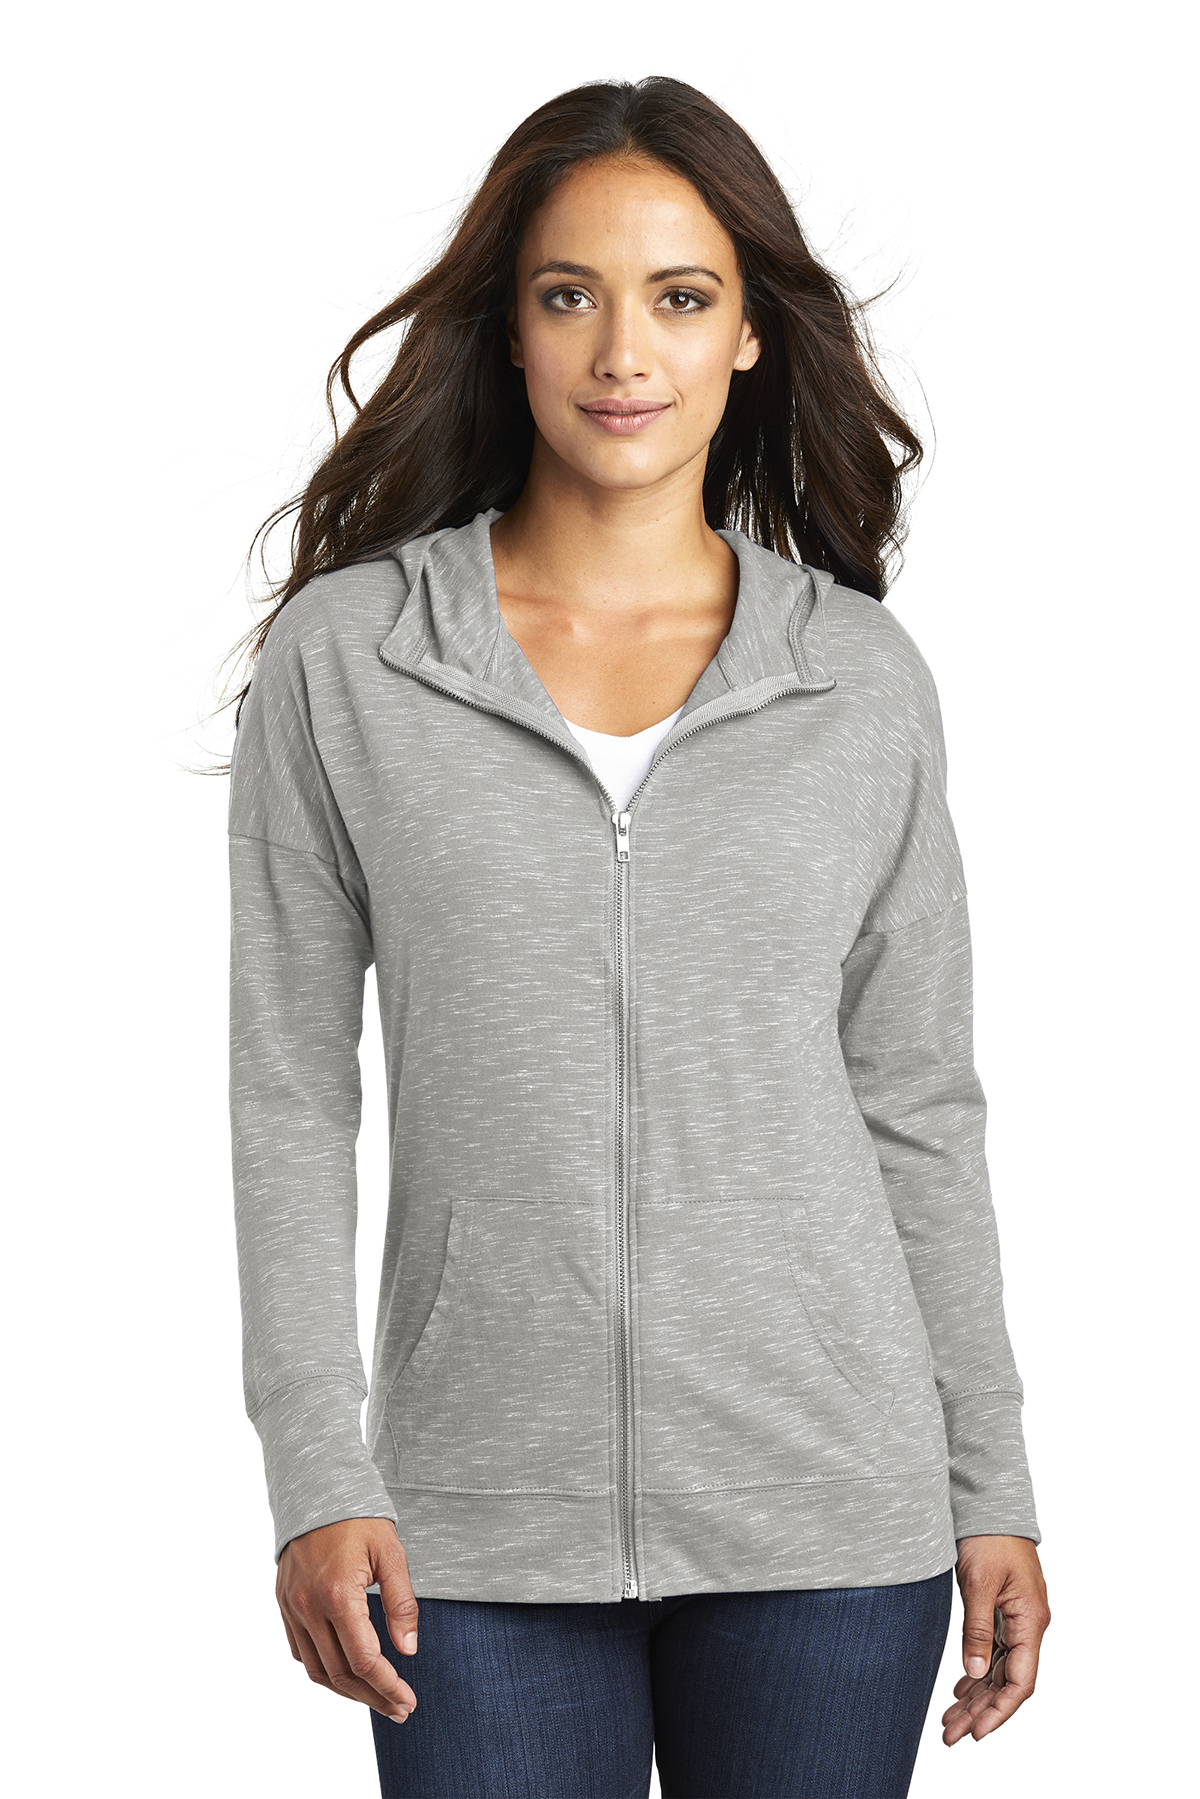 District Women's Medal Full-Zip Hoodie | Product | District